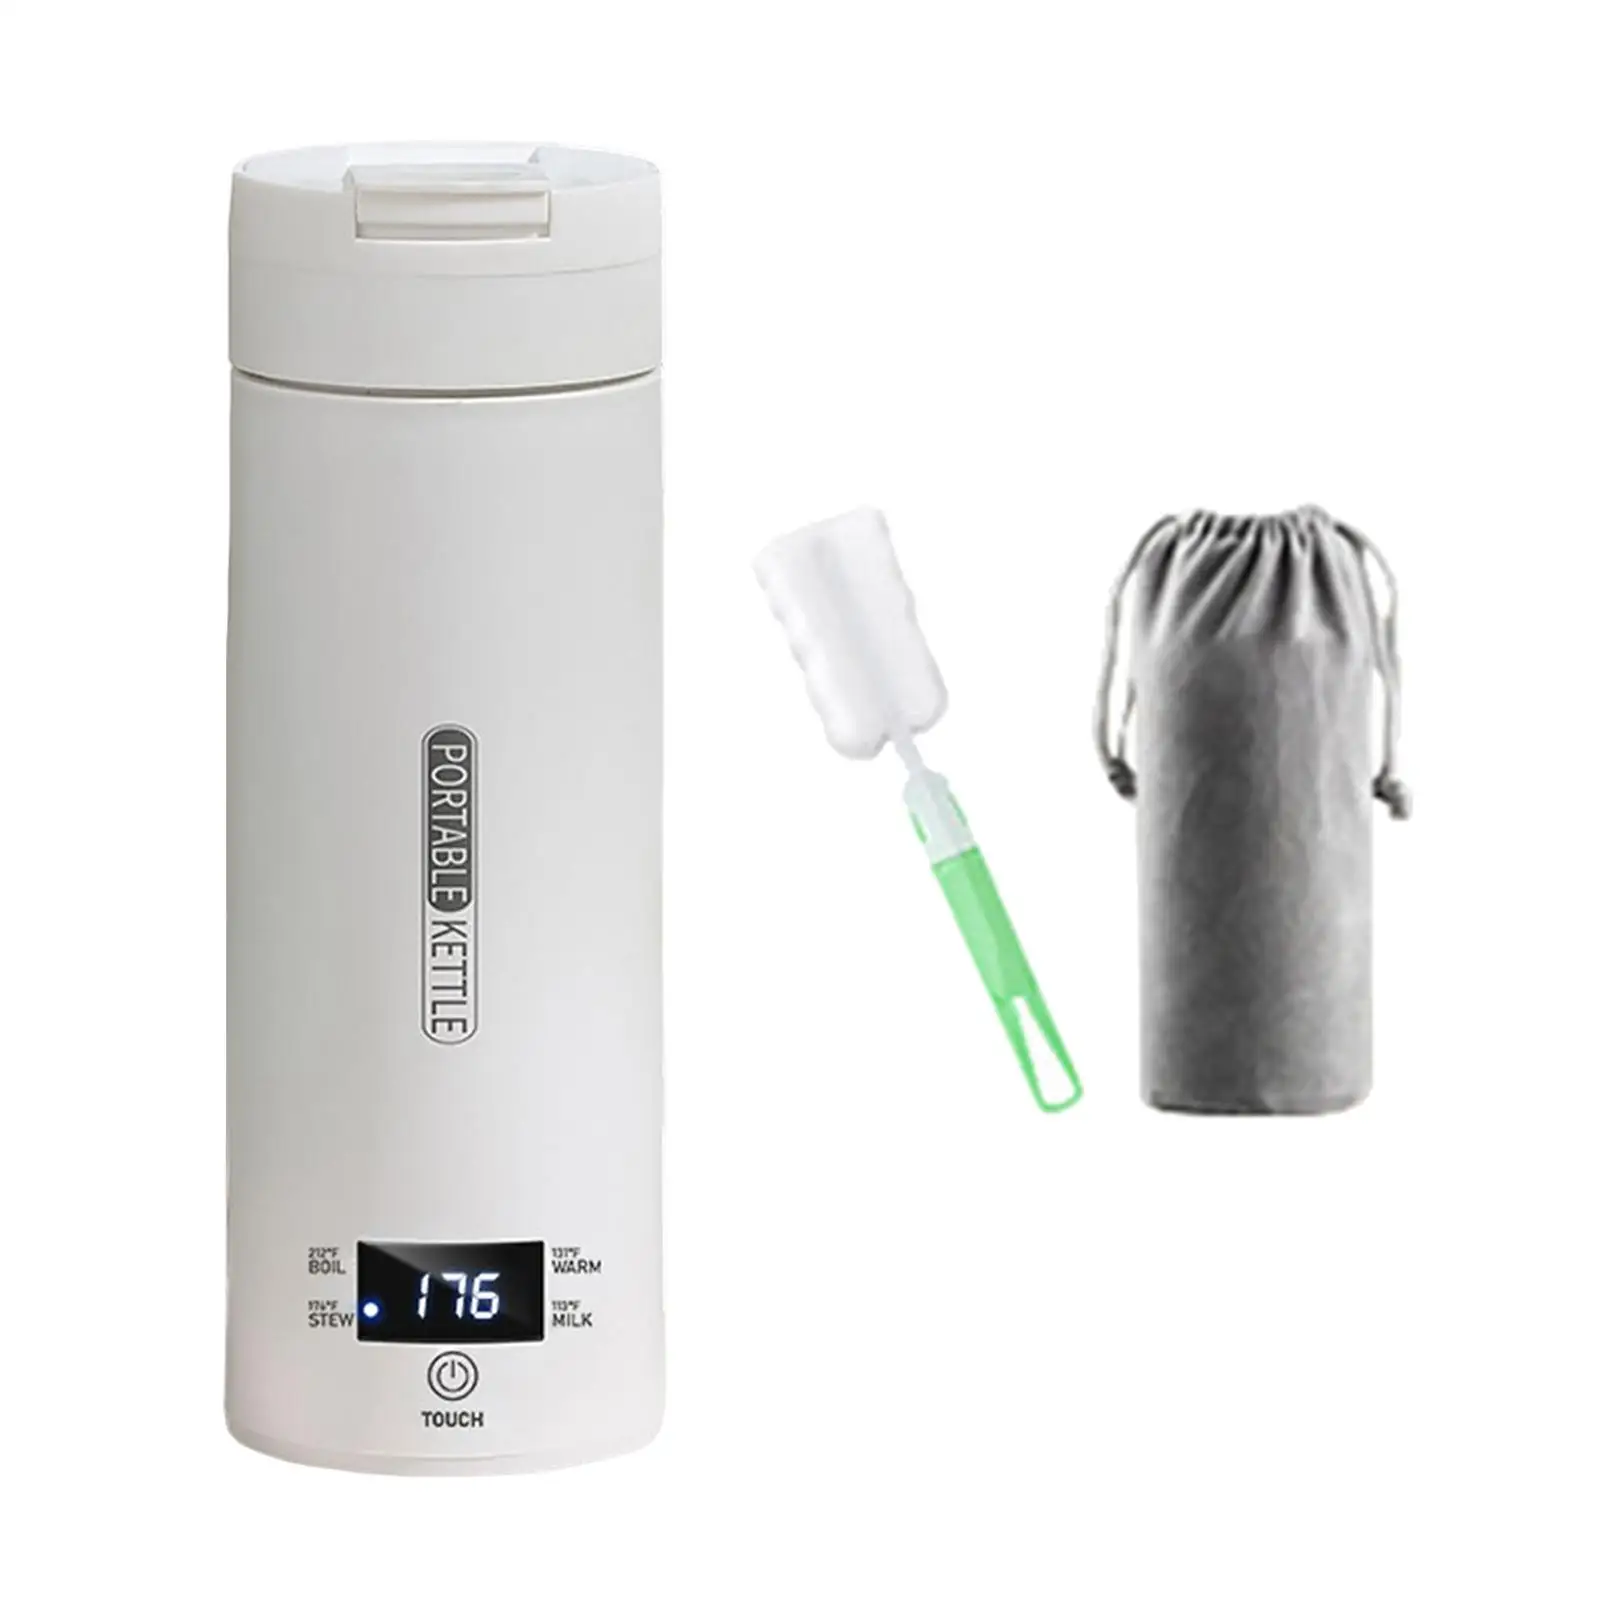 Portable Electric Kettle Hot Water Kettle Travel Vacuum Insulated Mug Electric Kettle for Camping